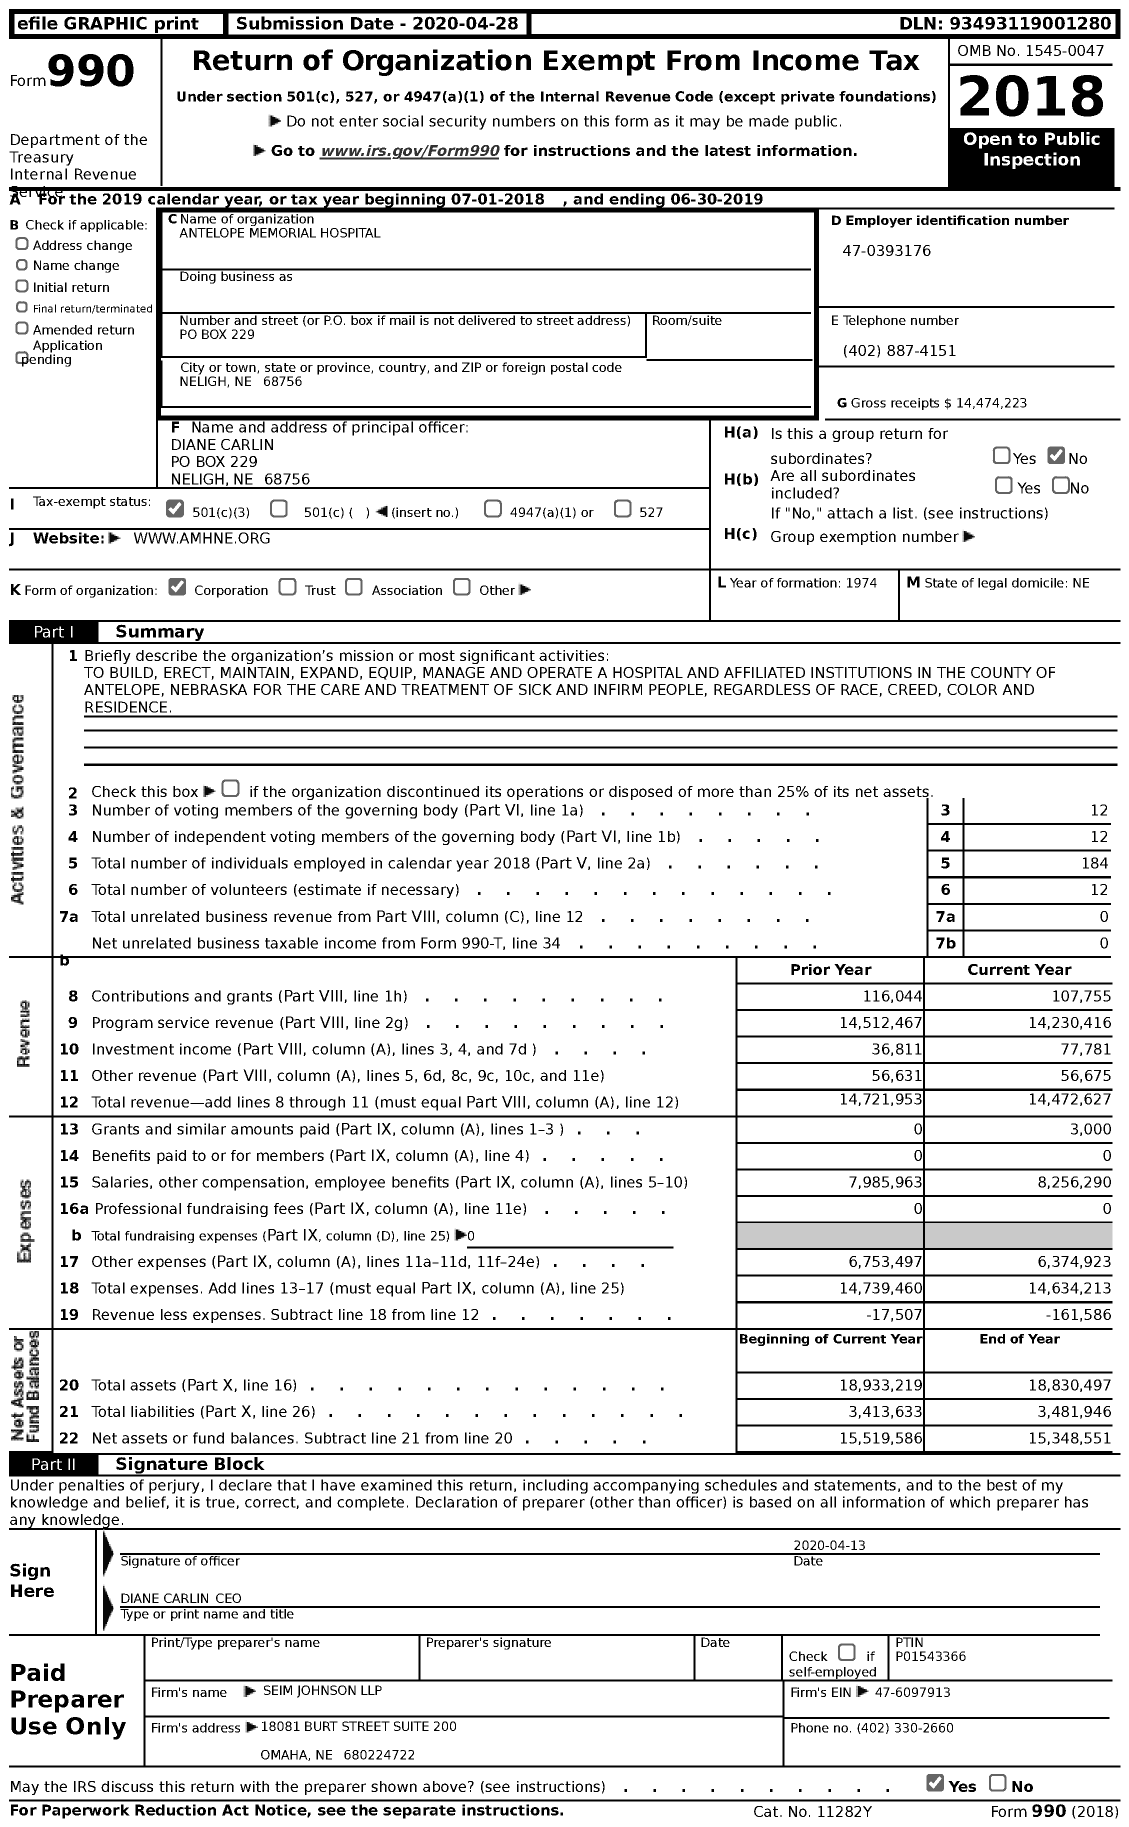 Image of first page of 2018 Form 990 for Antelope Memorial Hospital (AMH)